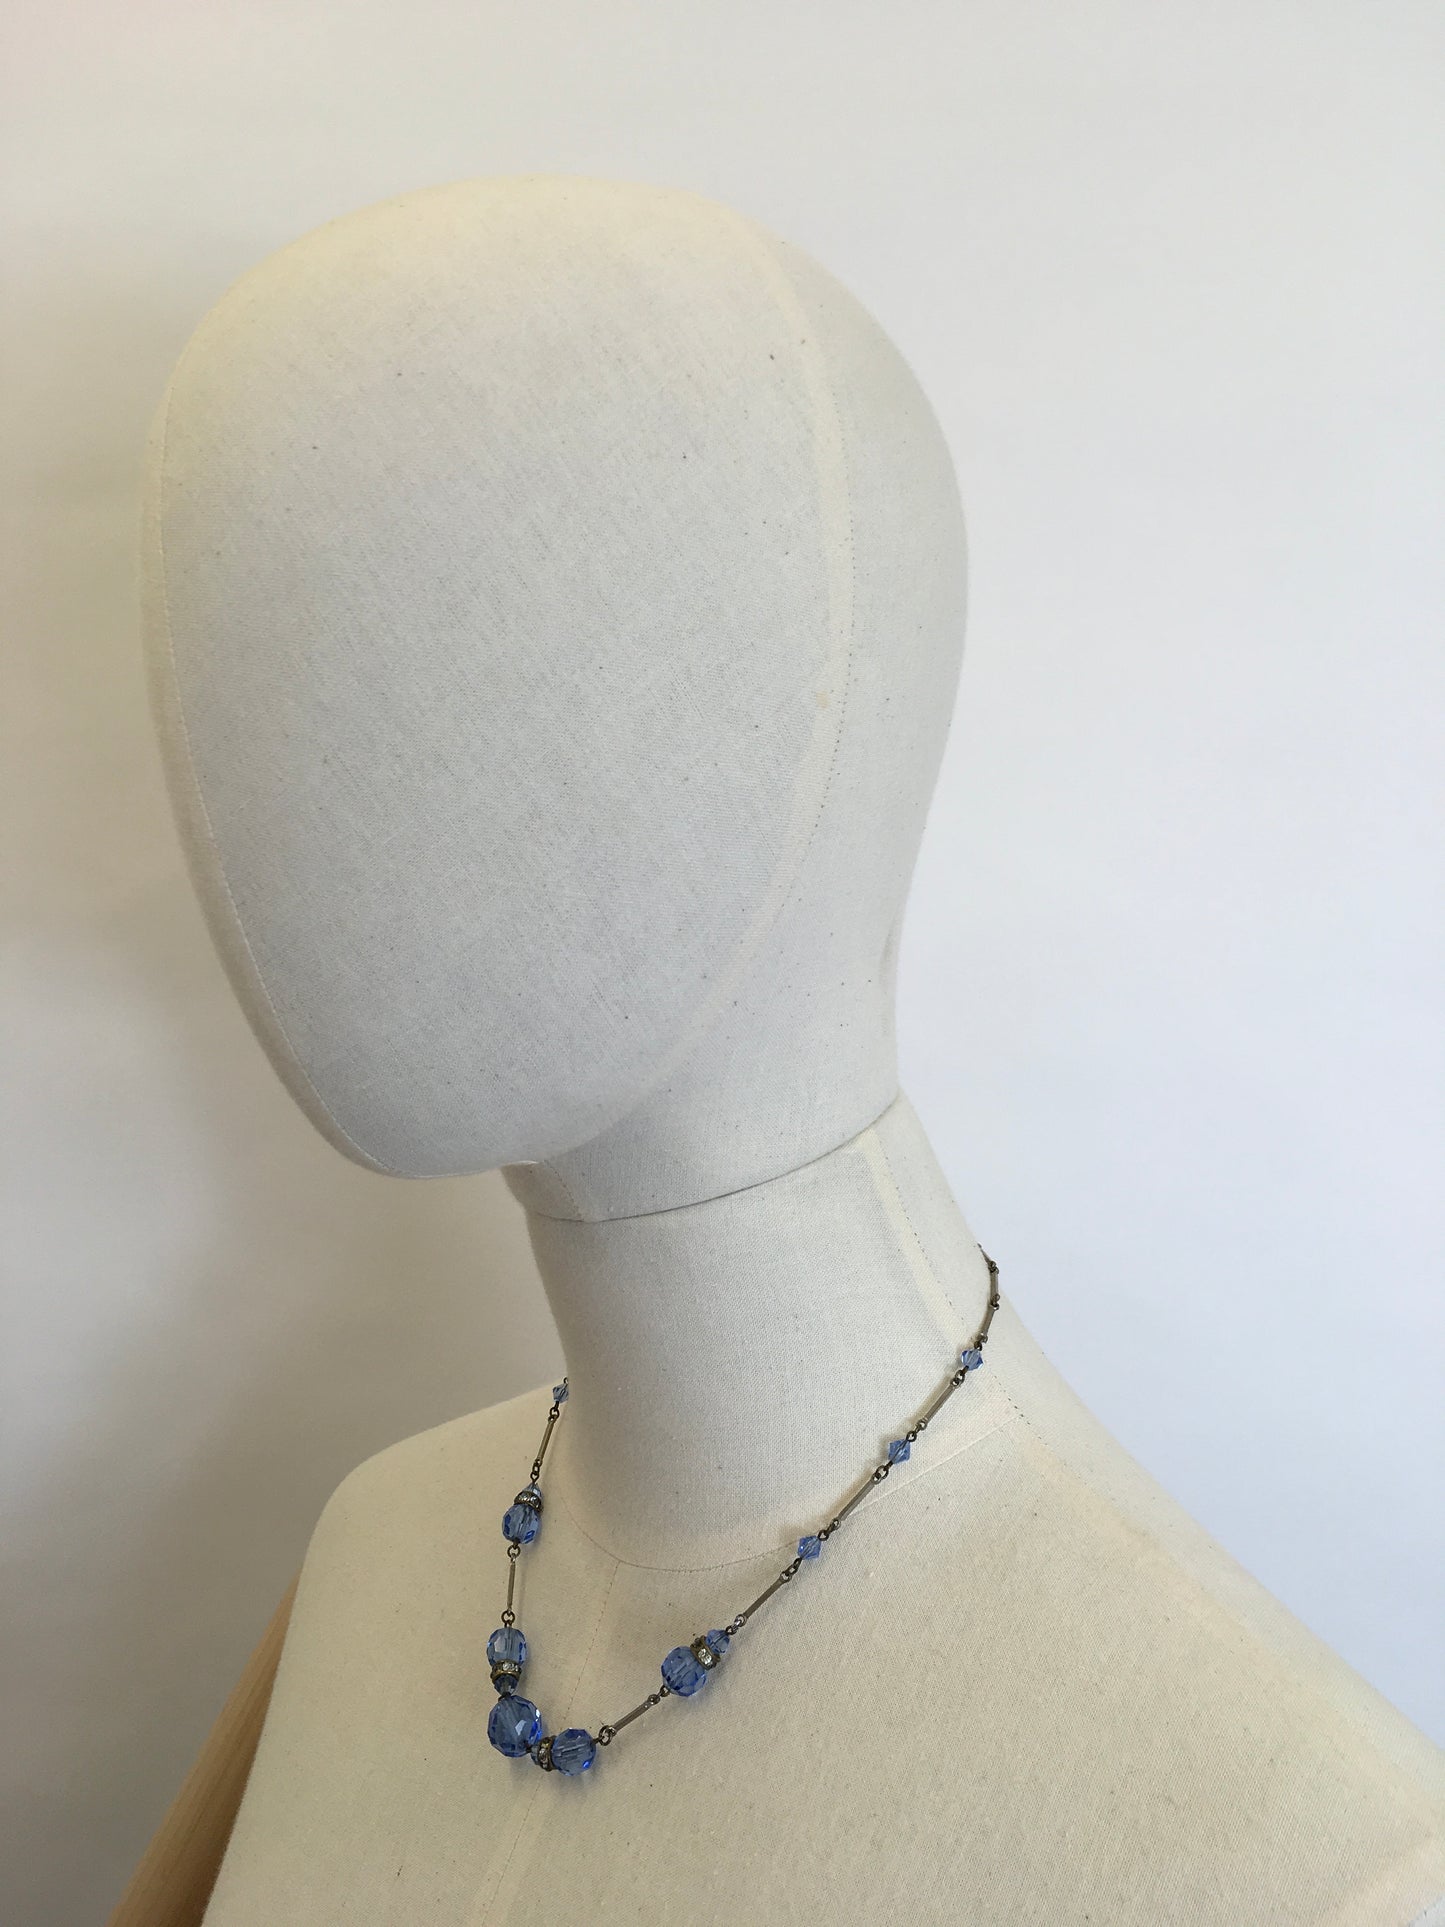 Original 1930’s Necklace - With Royal Blue Glass Beads